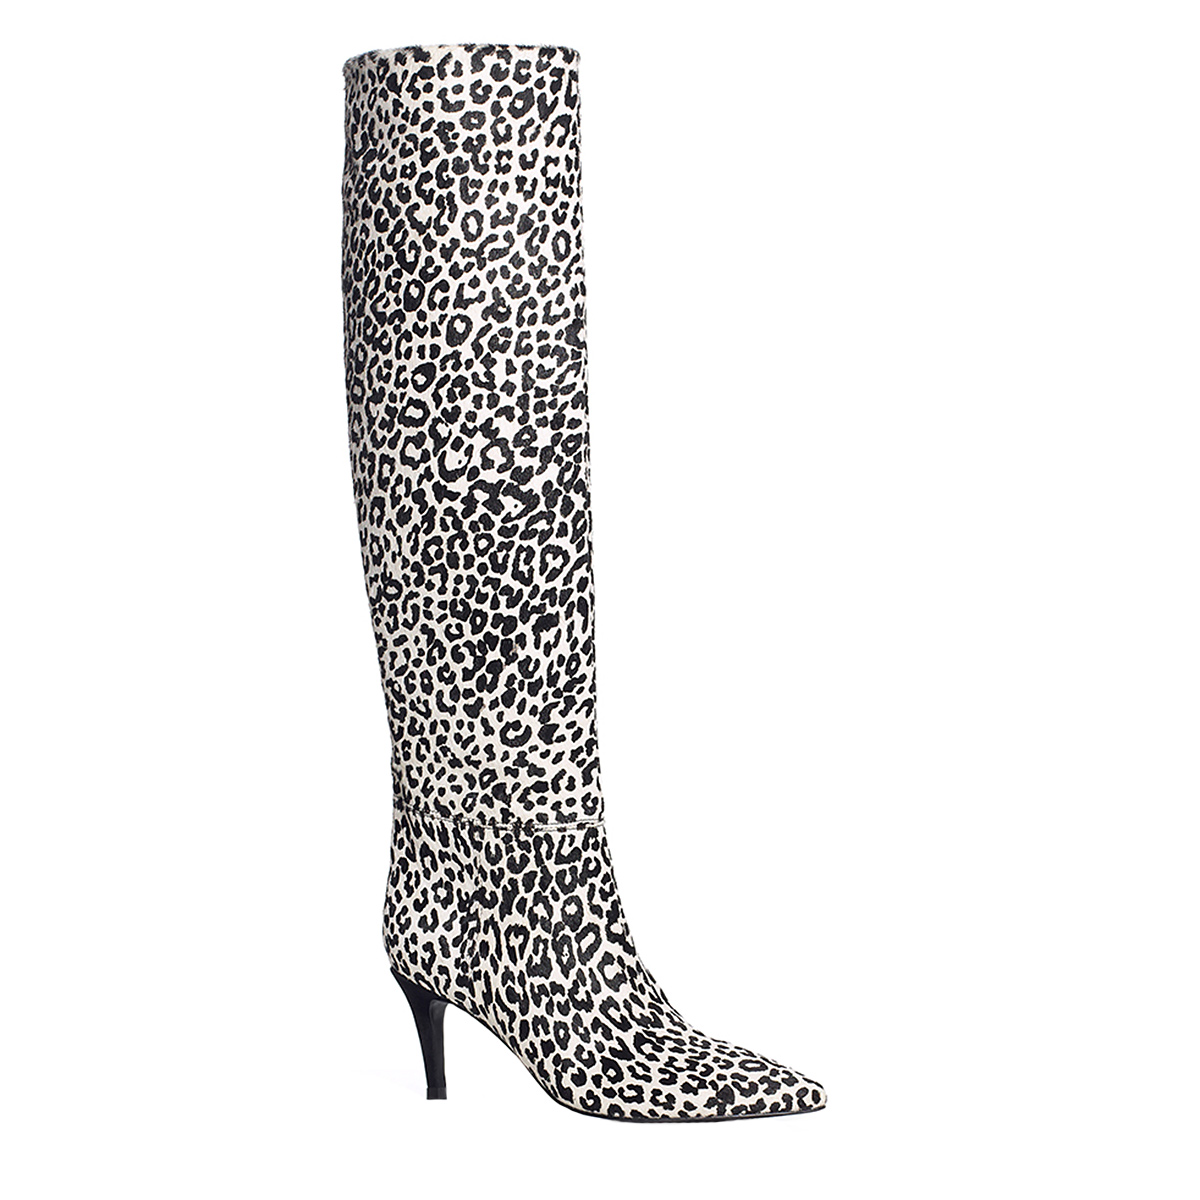 Elizabeth Sulcer x Marc Fisher Boot Collection: Editor's Picks | UsWeekly